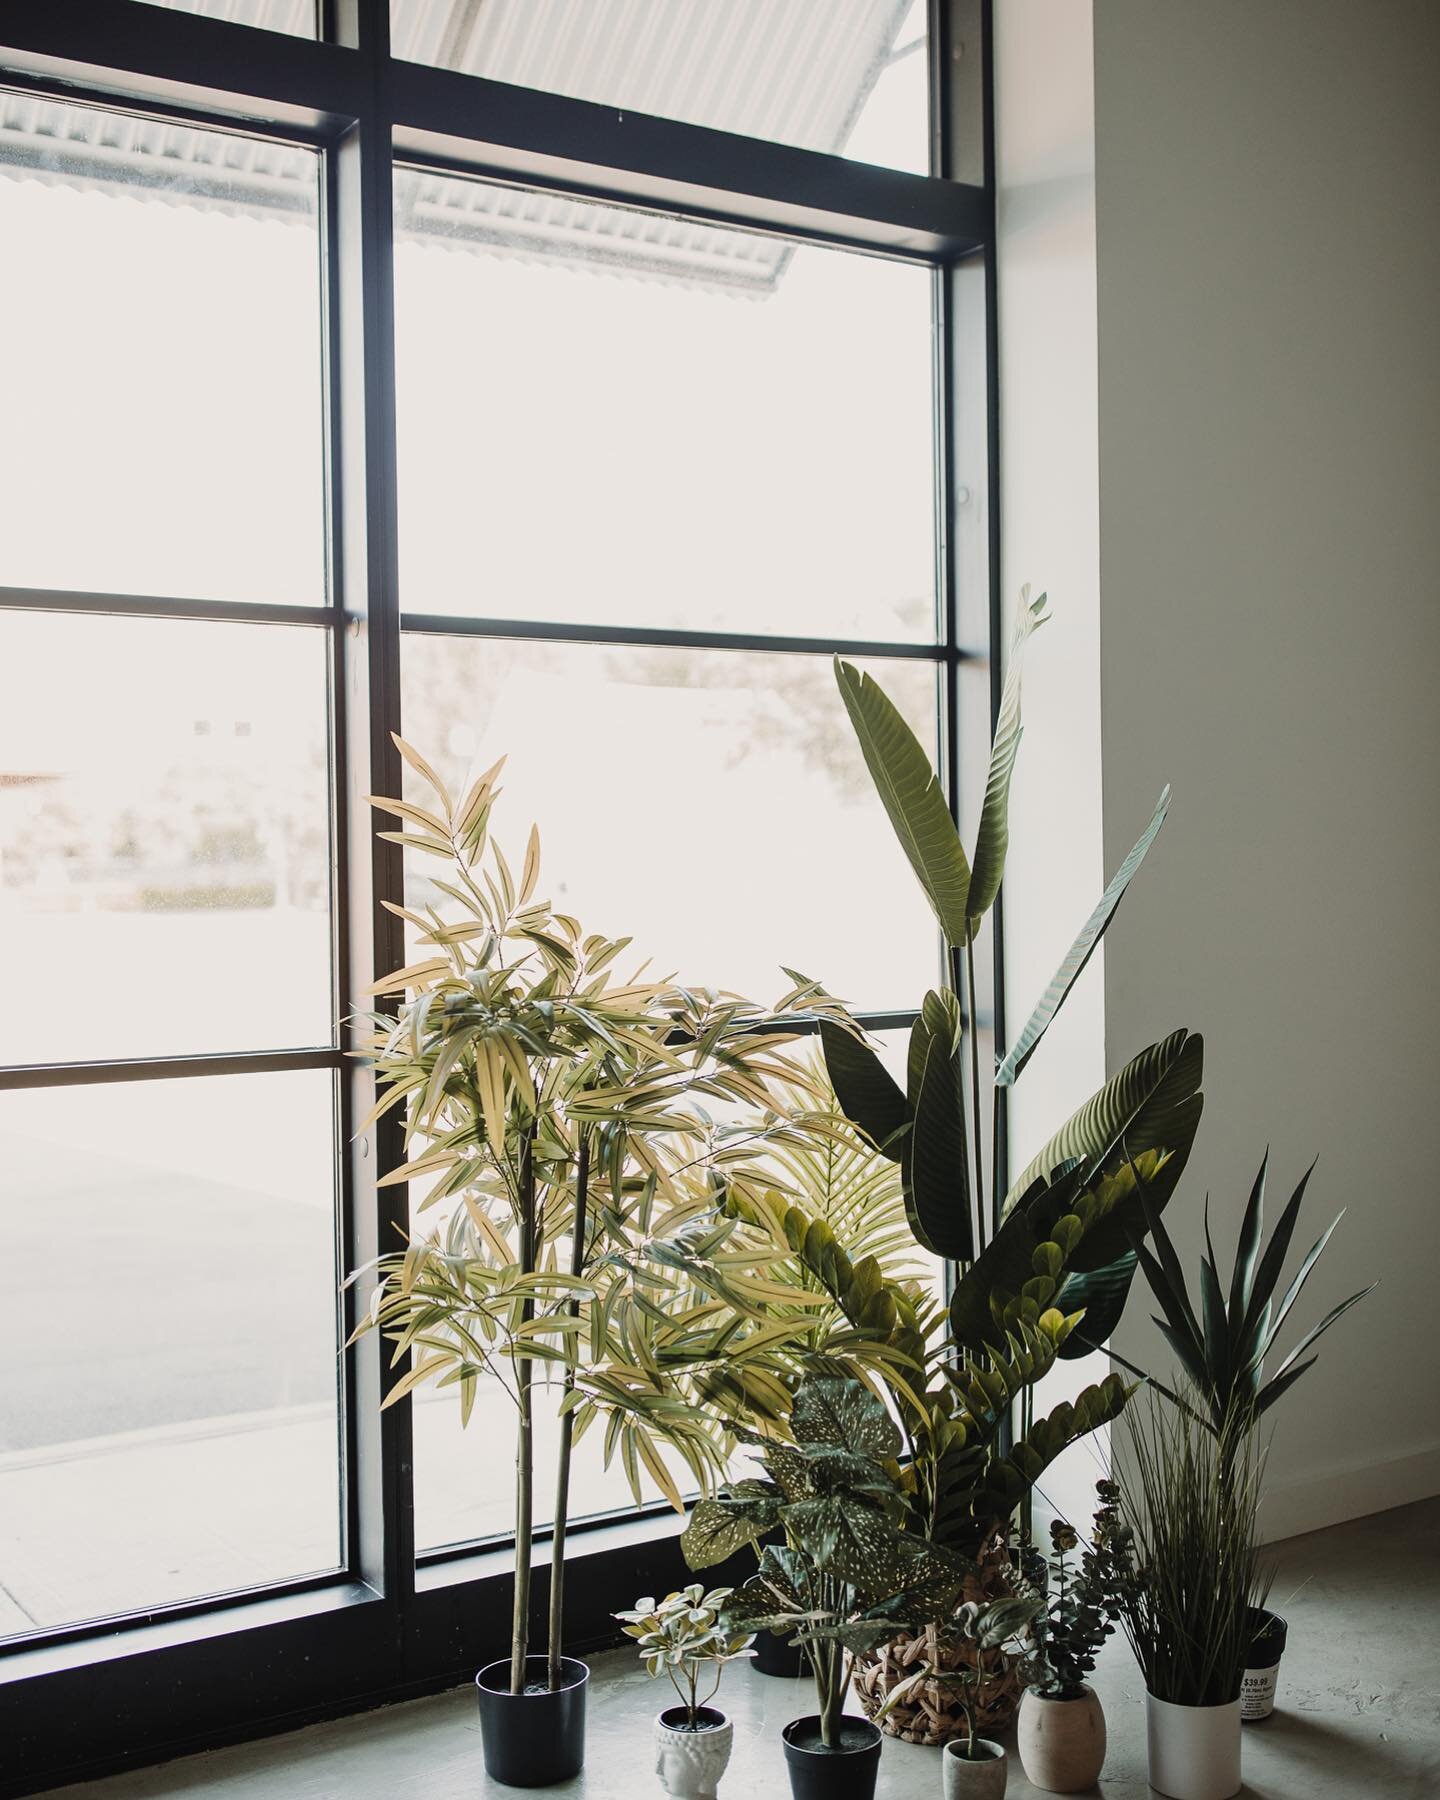 where are my plant enthusiast? 🌿
.
.
.
#swmstudios #photographystudio #dfwstudio #dfwphotographystudio #photostudio #dallas #dfw #allen #dallasphotographystudio #naturallightstudio #dallasphotographer #dallasvideographer #fashionphotography #coworki